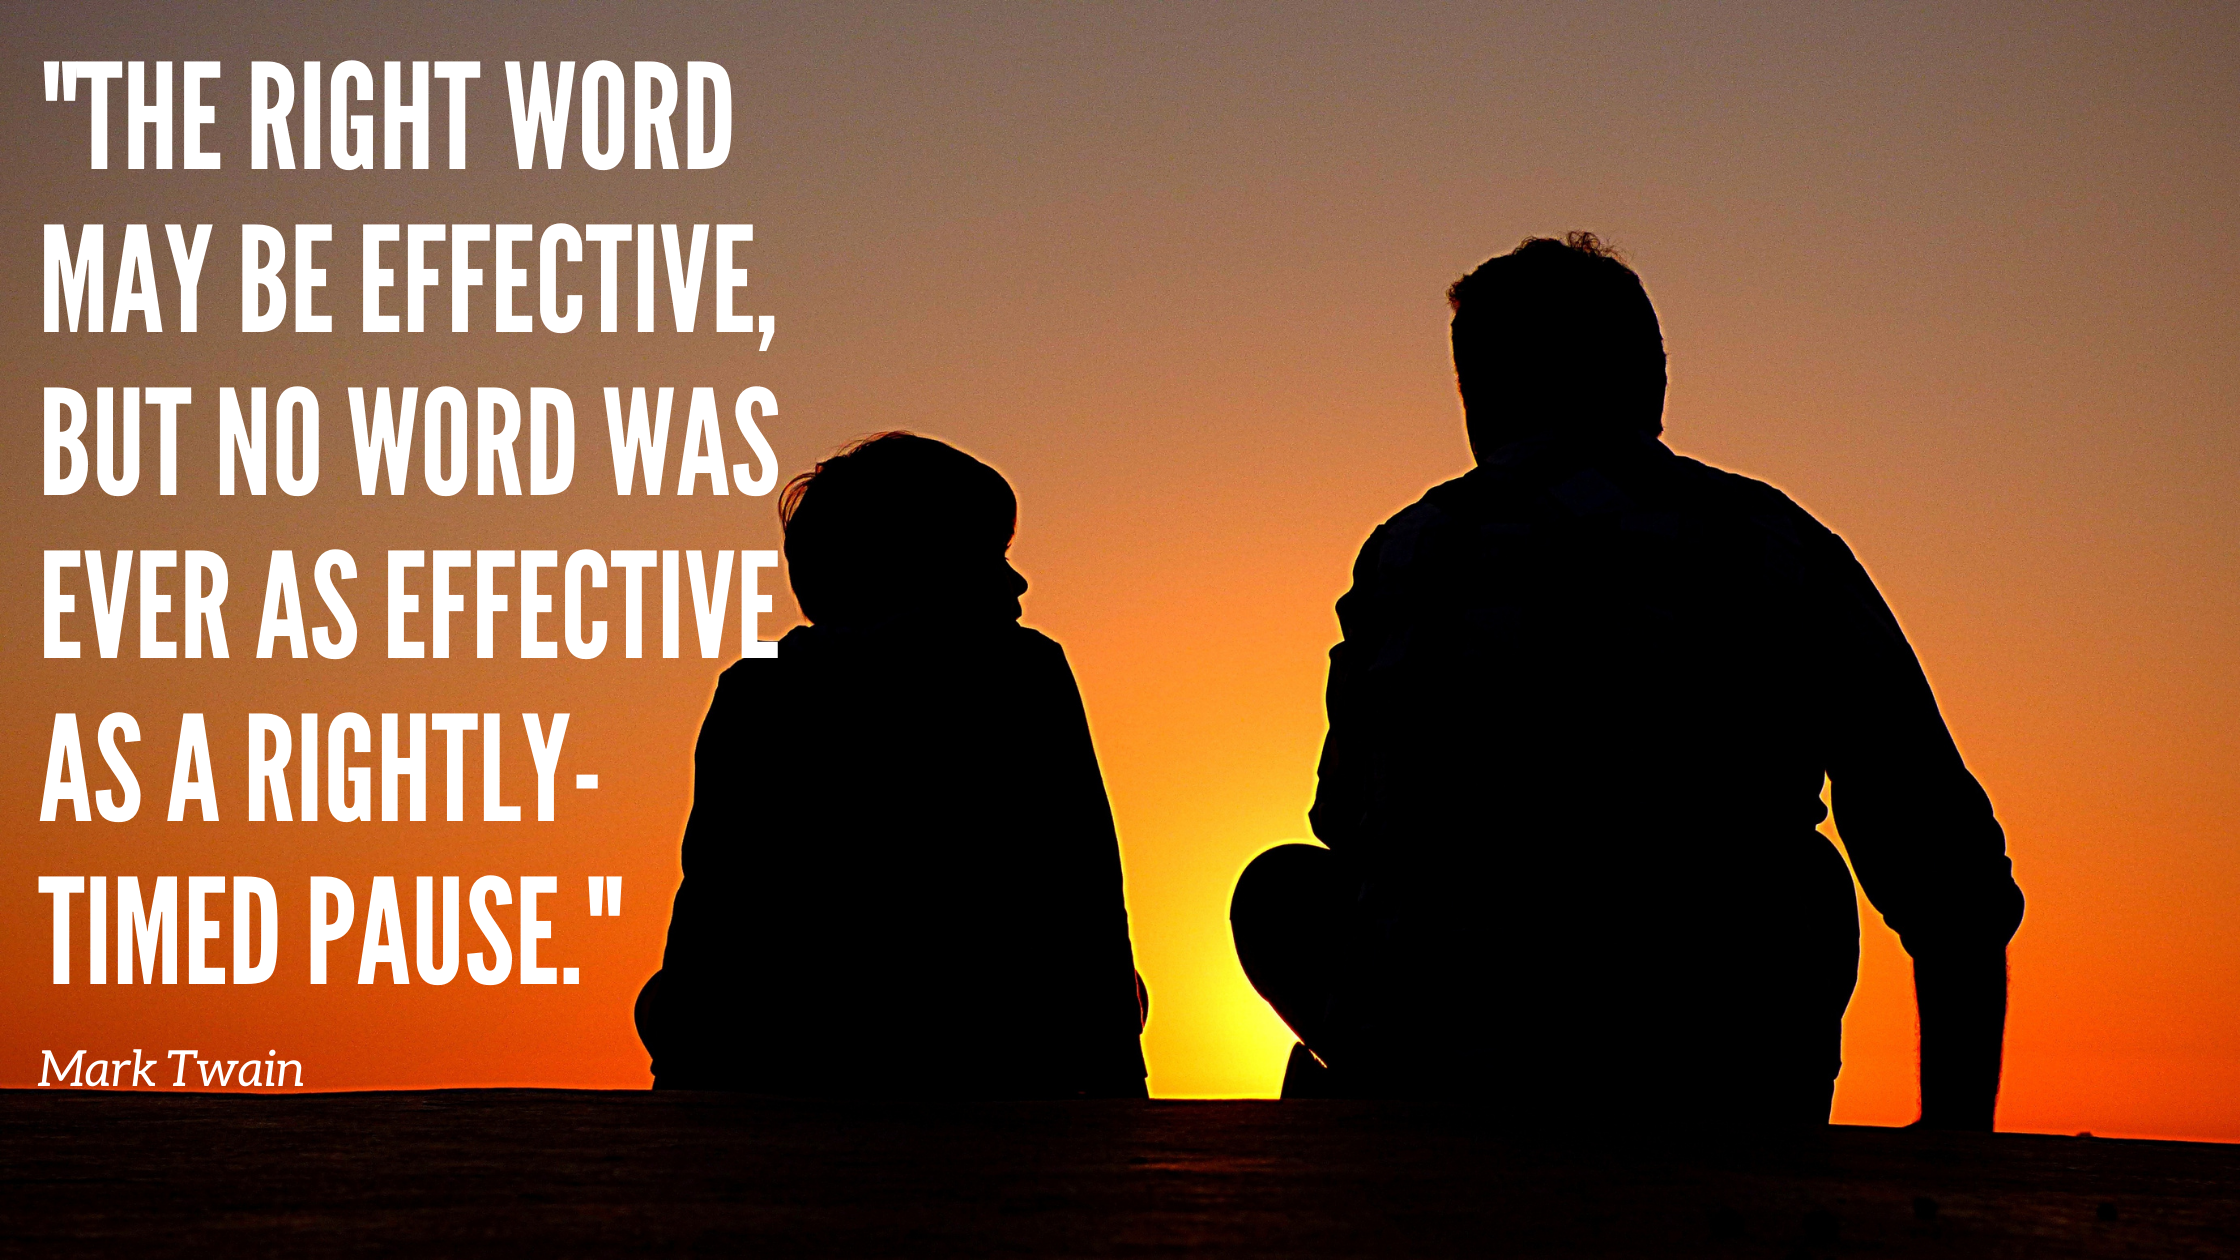 The right word may be effective, but no word was ever as effective as a rightly-timed pause.